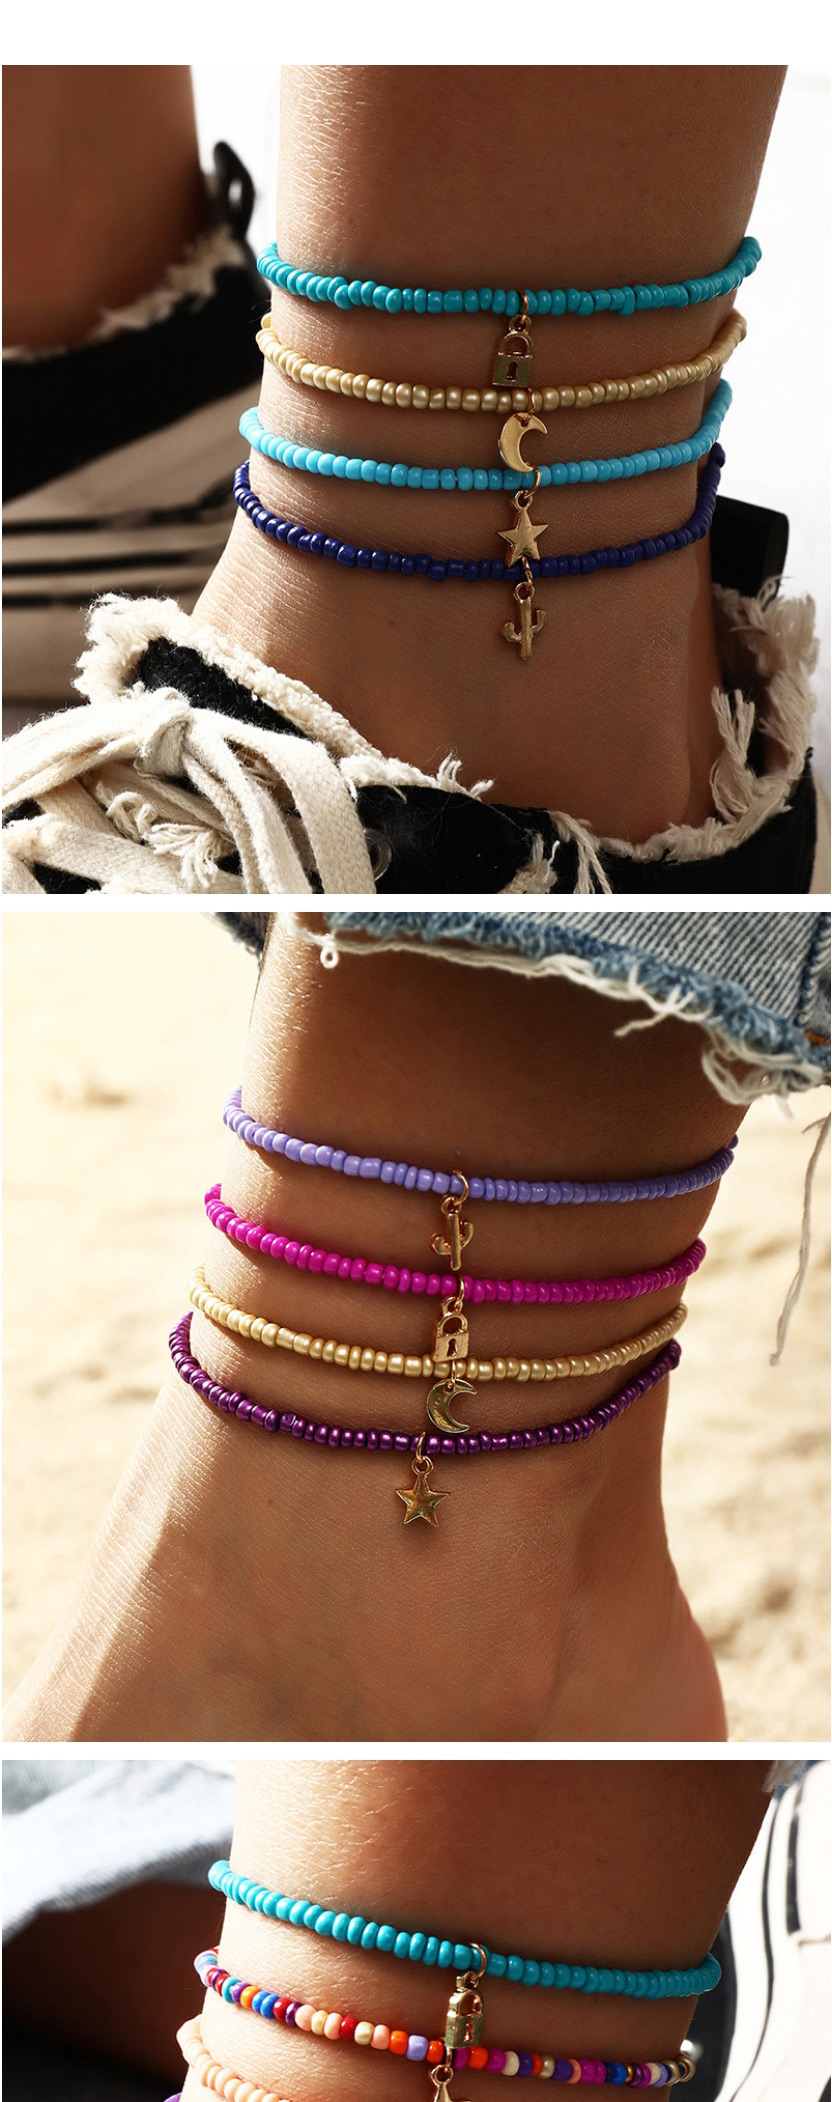 Fashion Red And White Lock Shaped Geometric Pendant Hand Woven Rice Bead Multilayer Anklet,Fashion Anklets